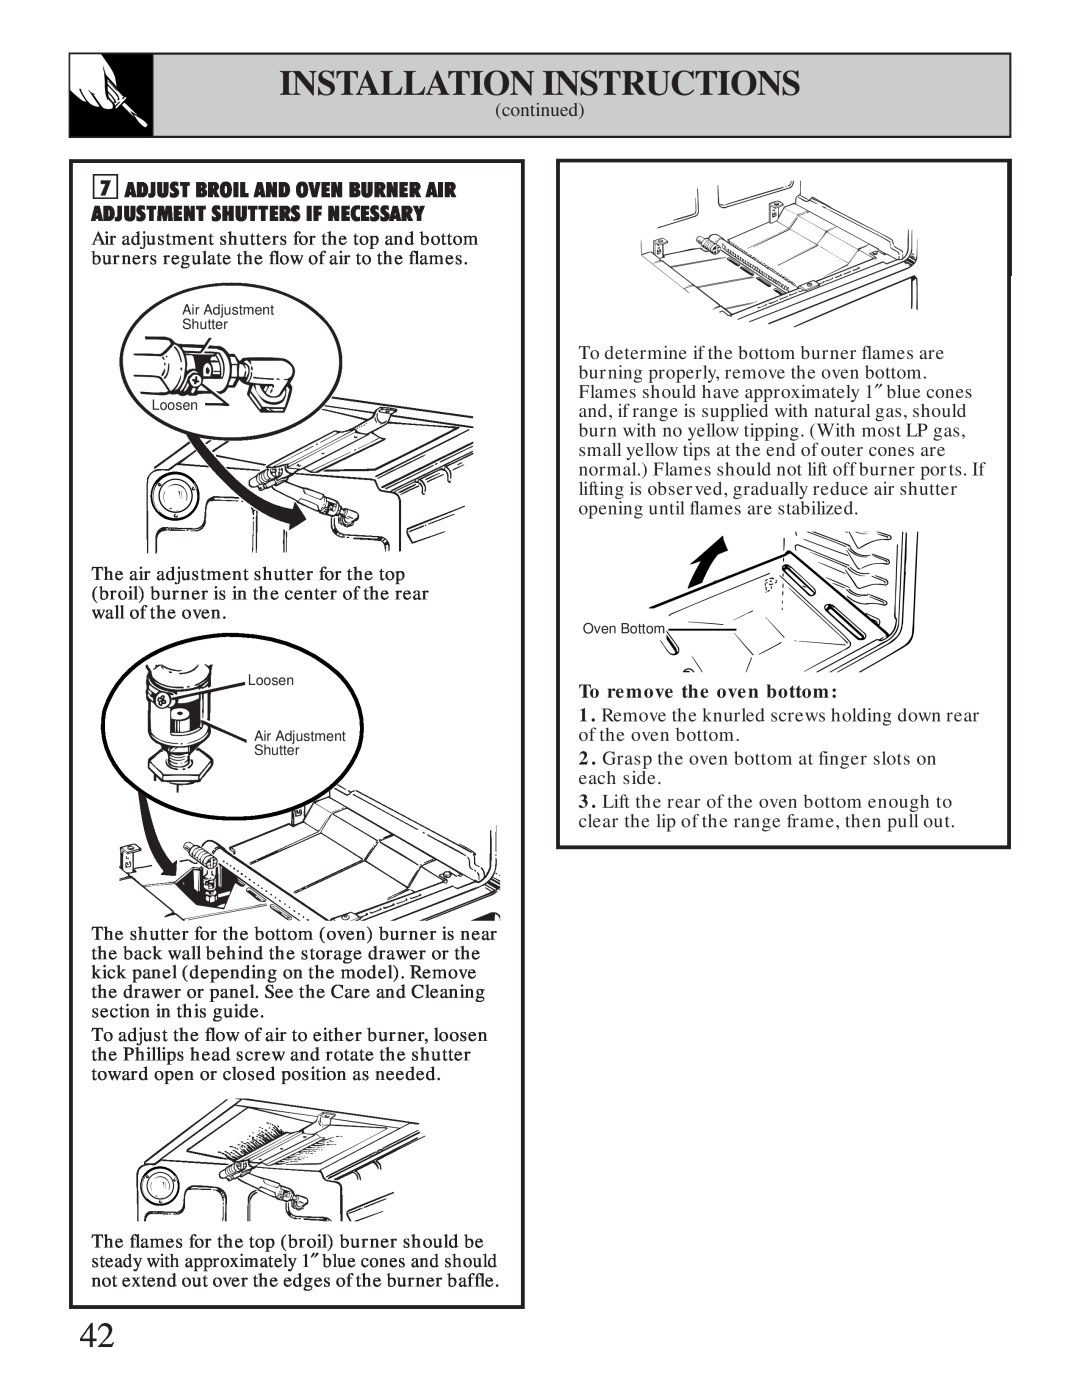 GE XL44 installation instructions Installation Instructions, To remove the oven bottom 